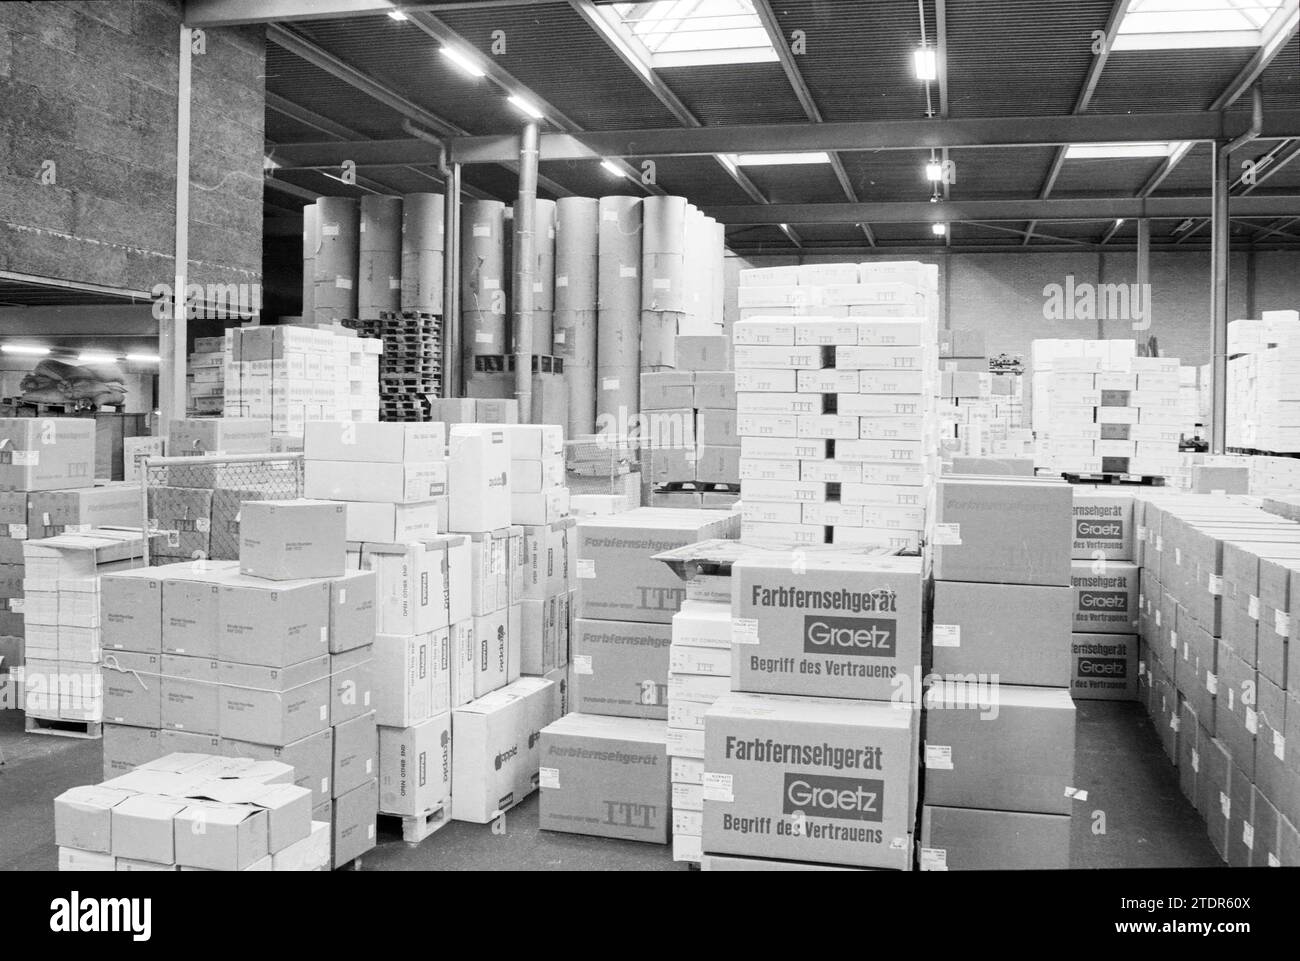 Warehouse fa. Overdorp IJmuiden, Warehouses, Transport, transport companies, IJmuiden, The Netherlands, 18-03-1981, Whizgle News from the Past, Tailored for the Future. Explore historical narratives, Dutch The Netherlands agency image with a modern perspective, bridging the gap between yesterday's events and tomorrow's insights. A timeless journey shaping the stories that shape our future Stock Photo